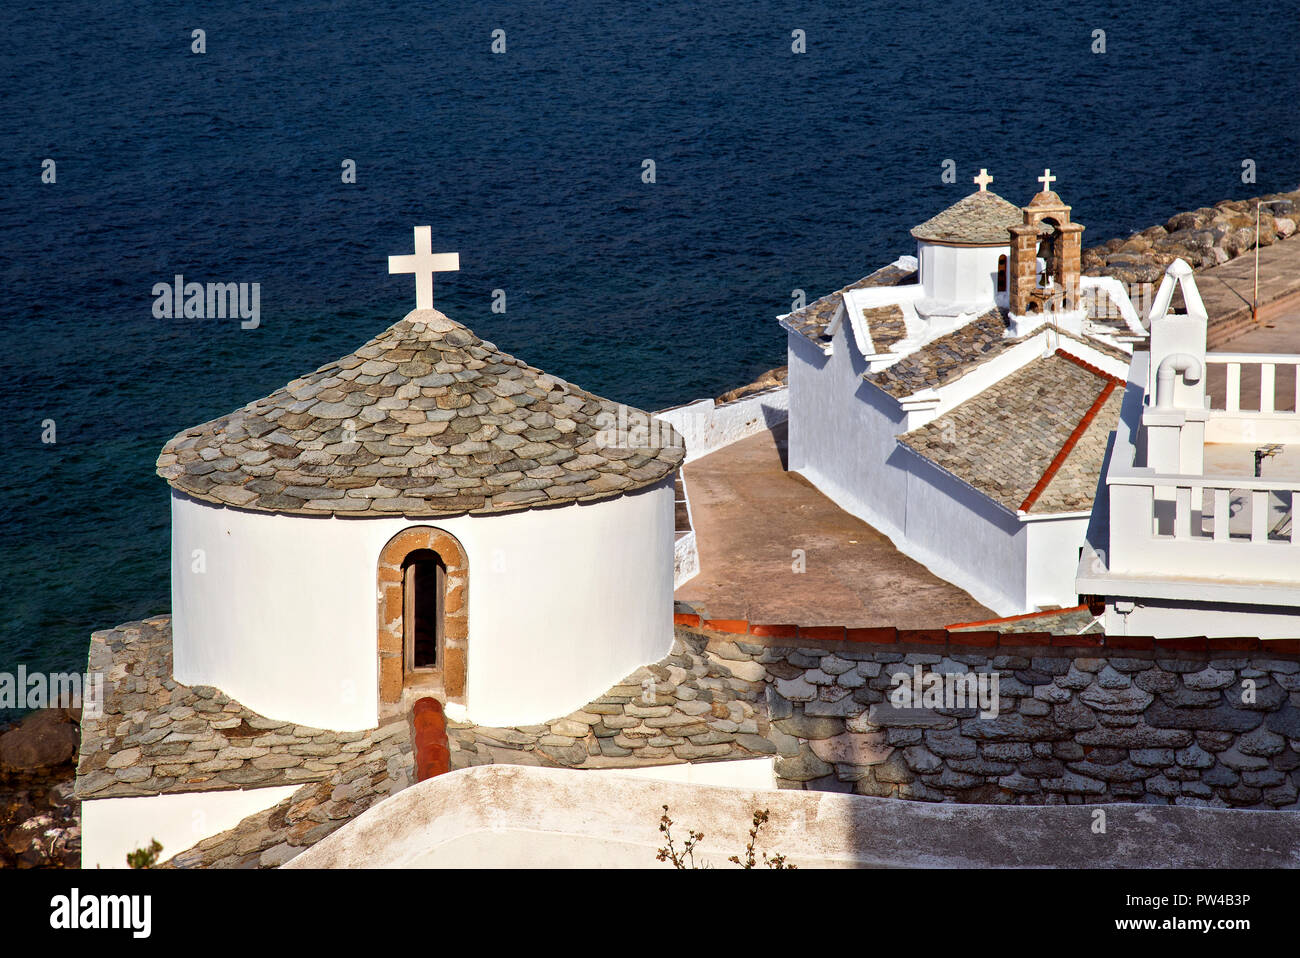 Churches in Skopelos town, Skopelos island, Northern Sporades, Greece. In the background the church of Virgin Mary, known as 'Panagitsa Tower'. Stock Photo